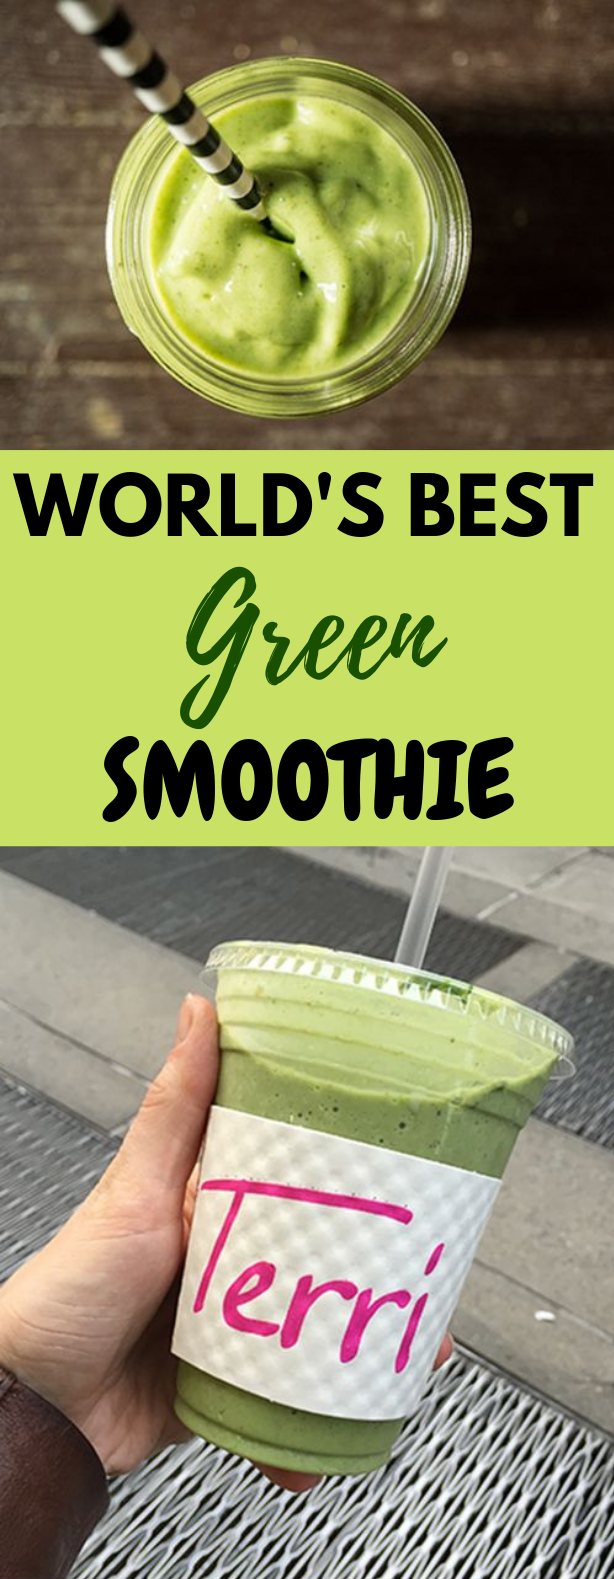 the world’s best green smoothie #Healthy #Smoothie